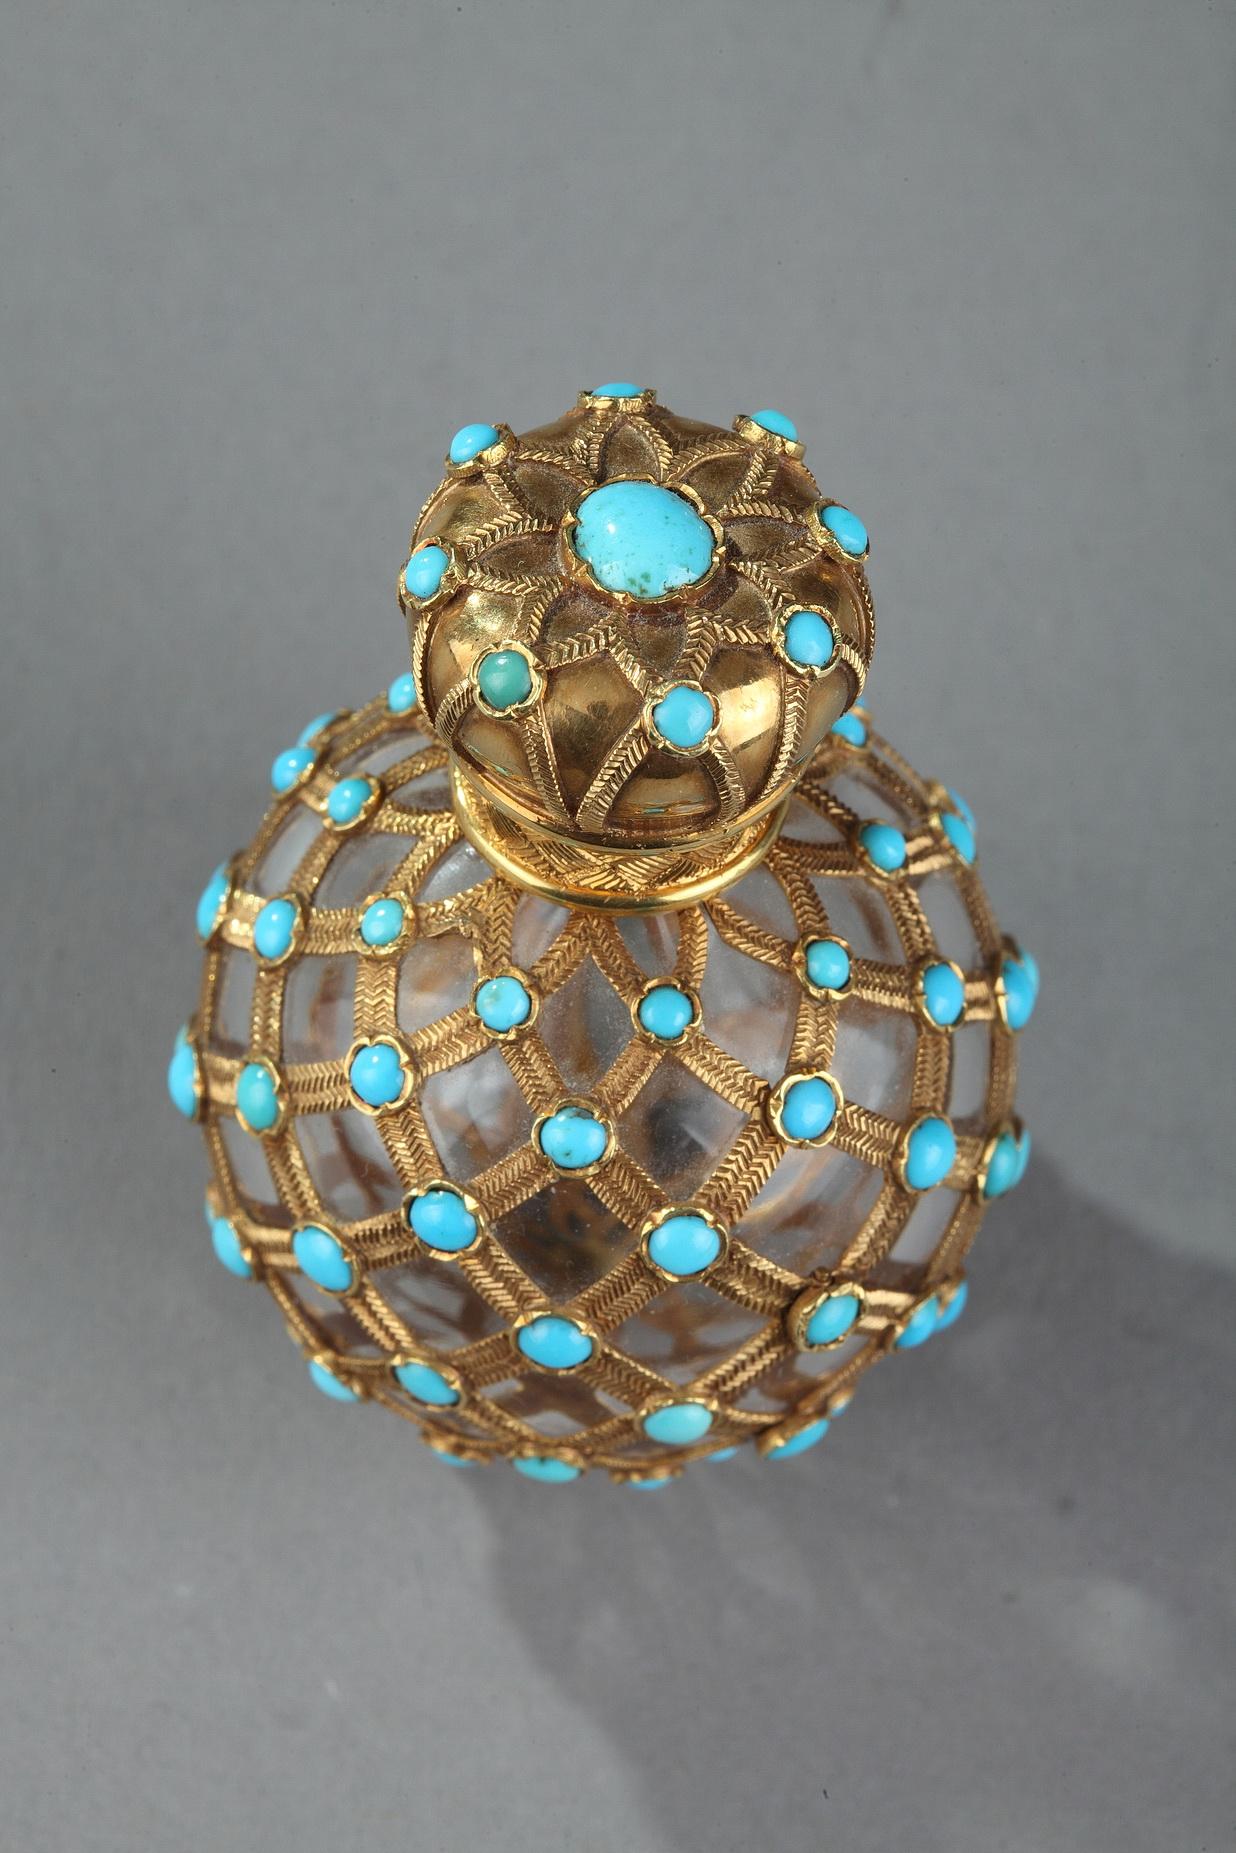 Round Perfume flask set in a finely chiseled gold mesh and enhanced with half turquoise pearls mounted in a cabochon. The Hinged cover decorated with the same gold and turquoise mesh.
Gold cap inside.
Gold mark: giraffe head 1835-1838.